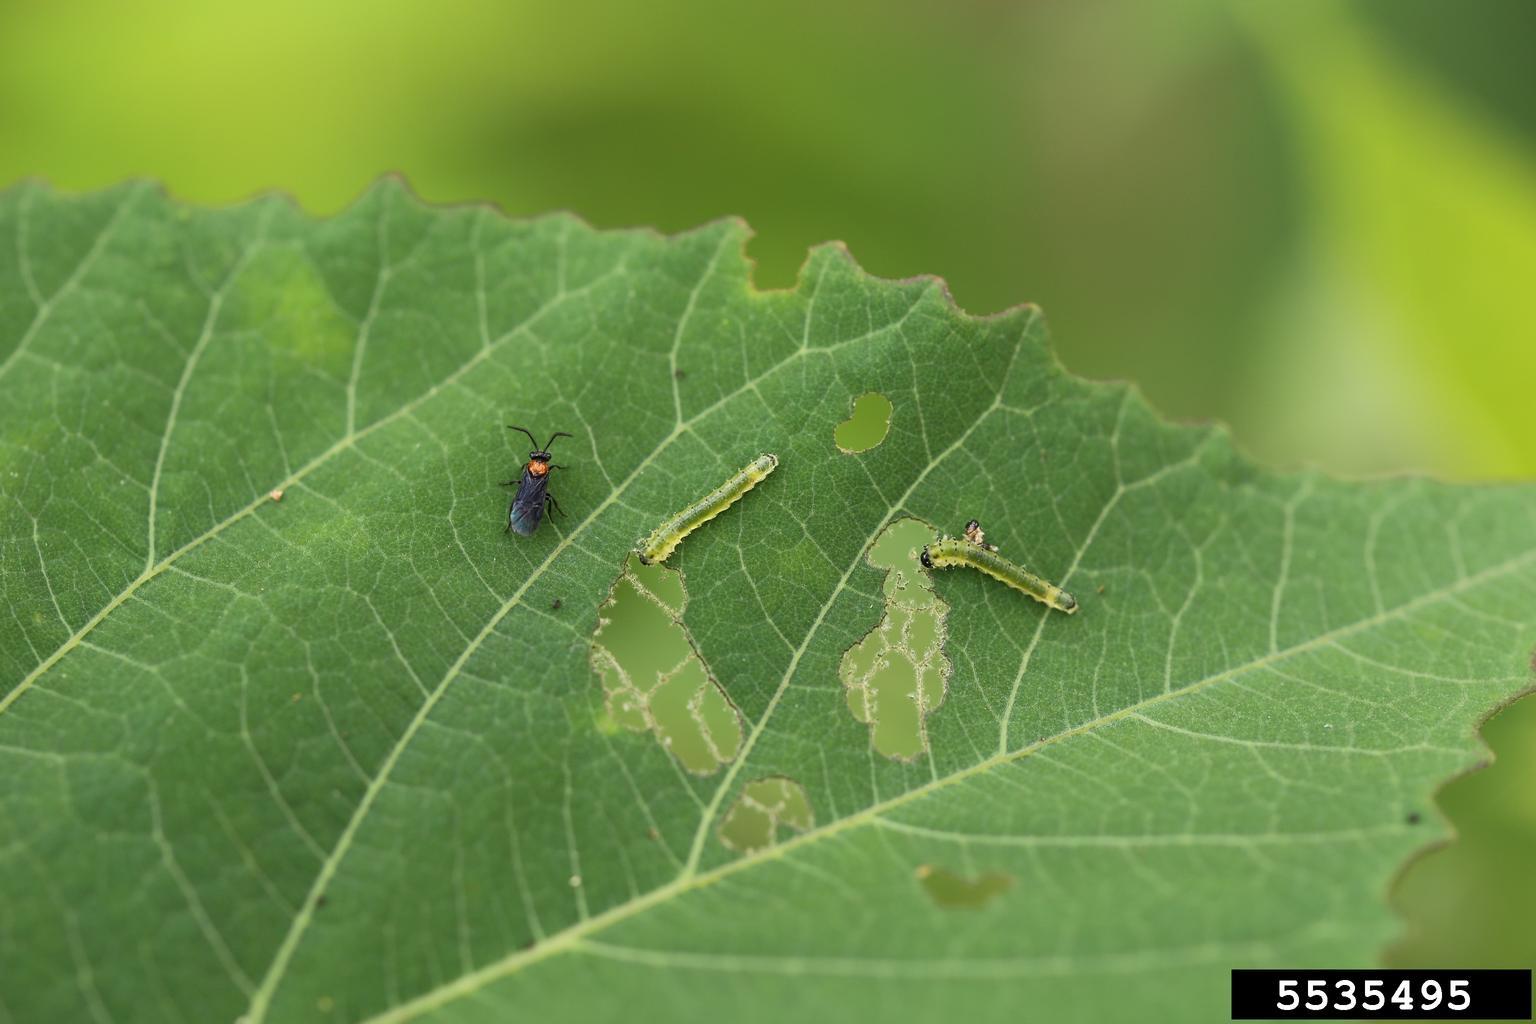 hibiscus sawfly larva and adult